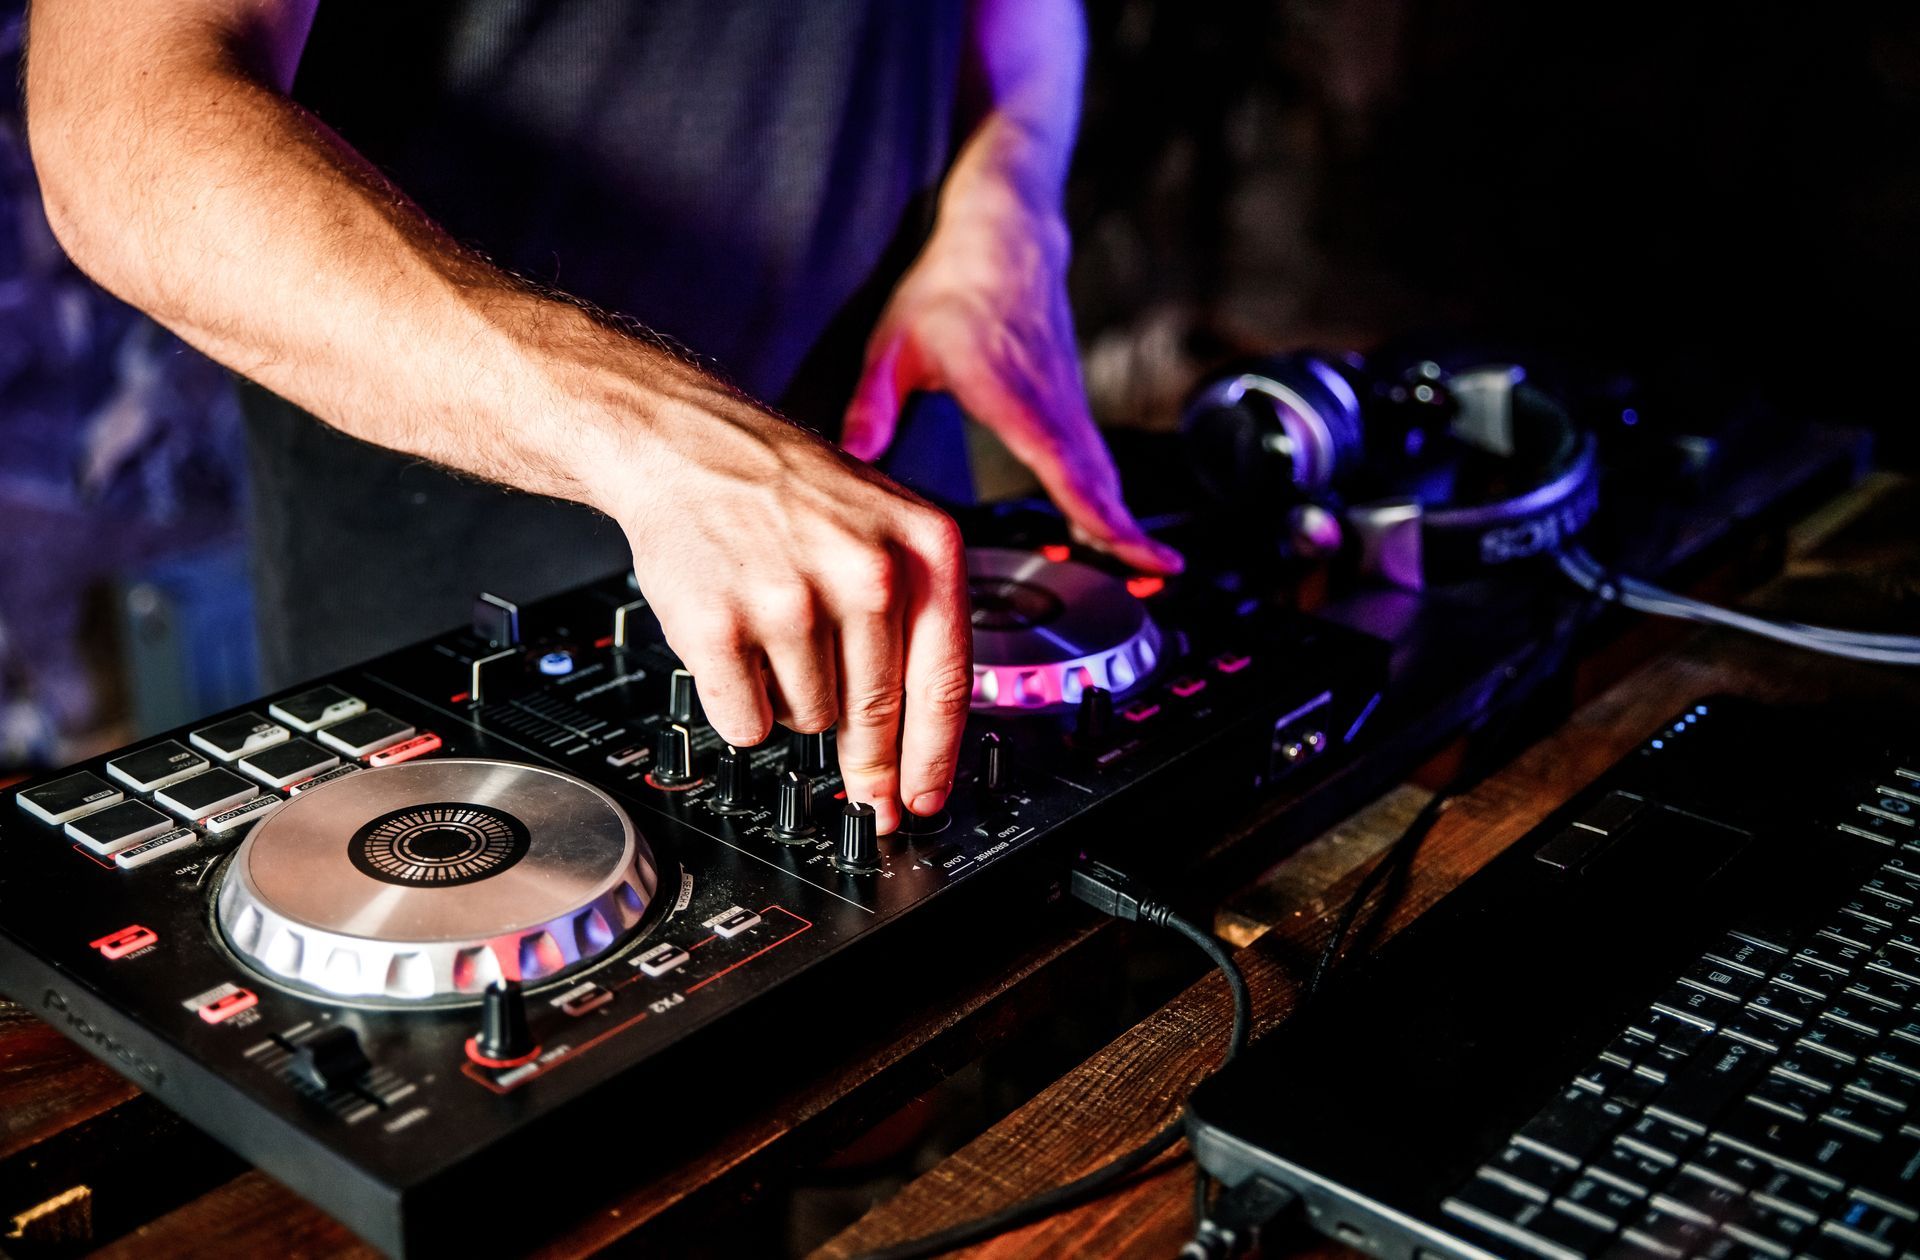 DJ plays live set and mixing music on turntable console at stage in the night club